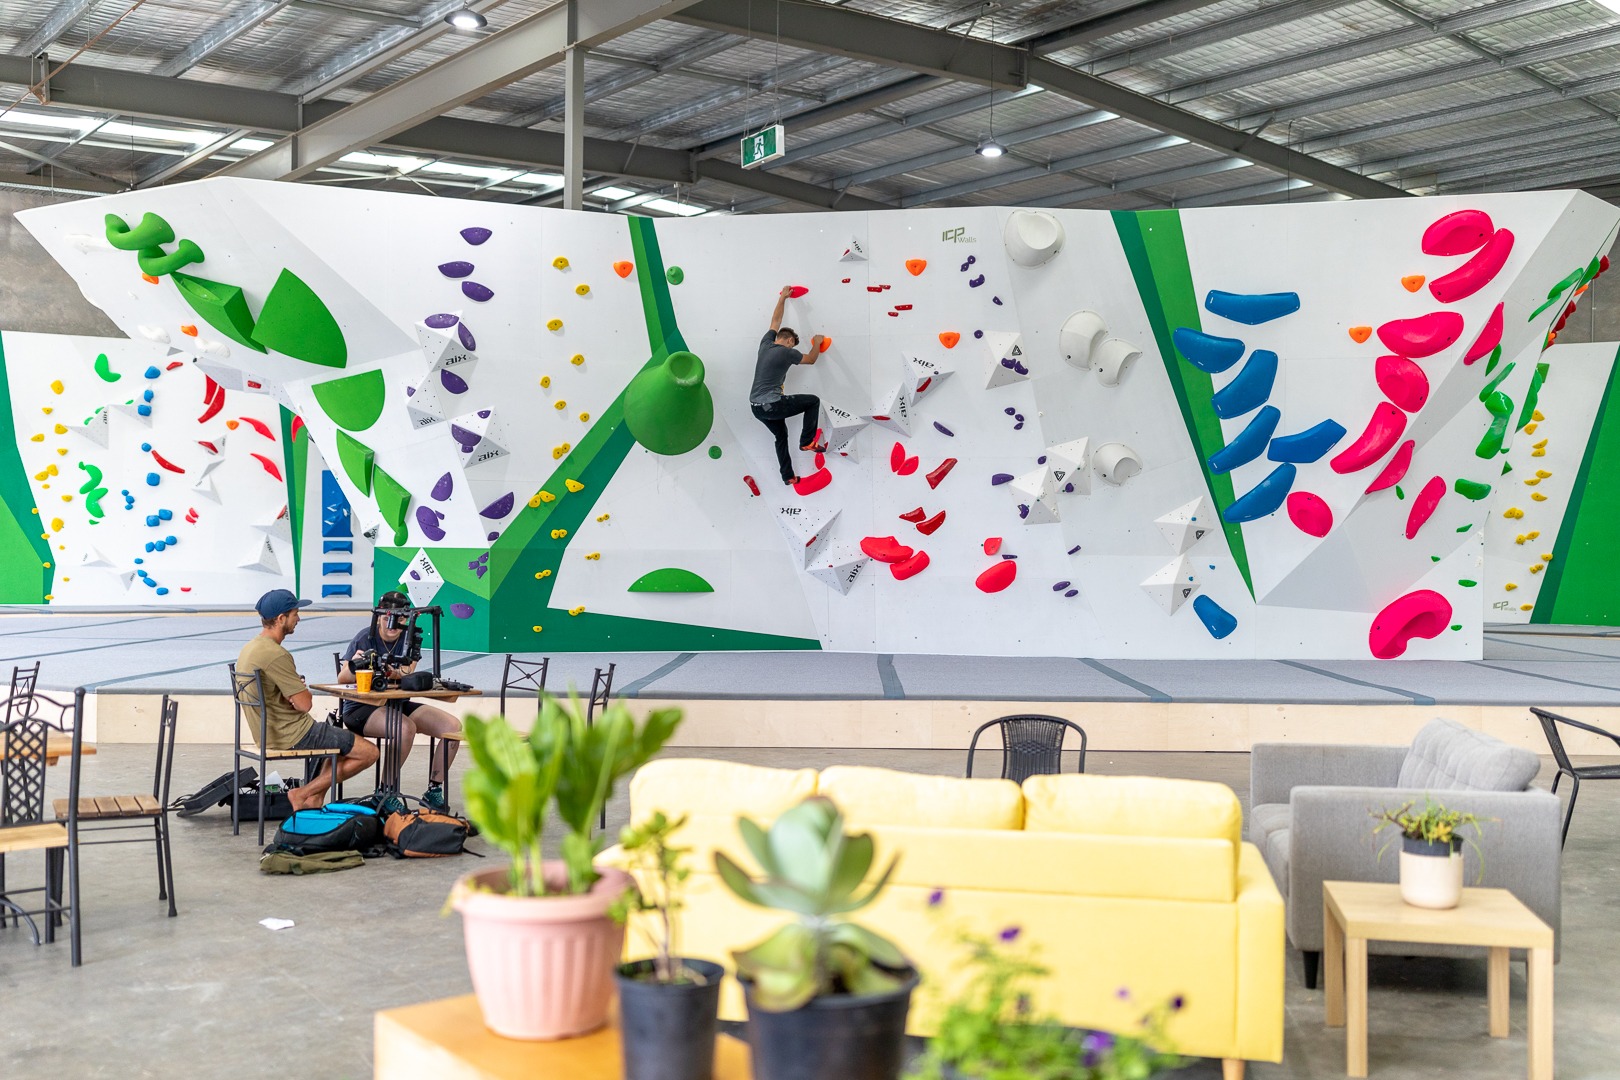 A bouldering gym built by ICP walls, filled with colourful climbing holds. A climber is climbing the holds in the background, while a couple is sitting at tables in the foreground. 